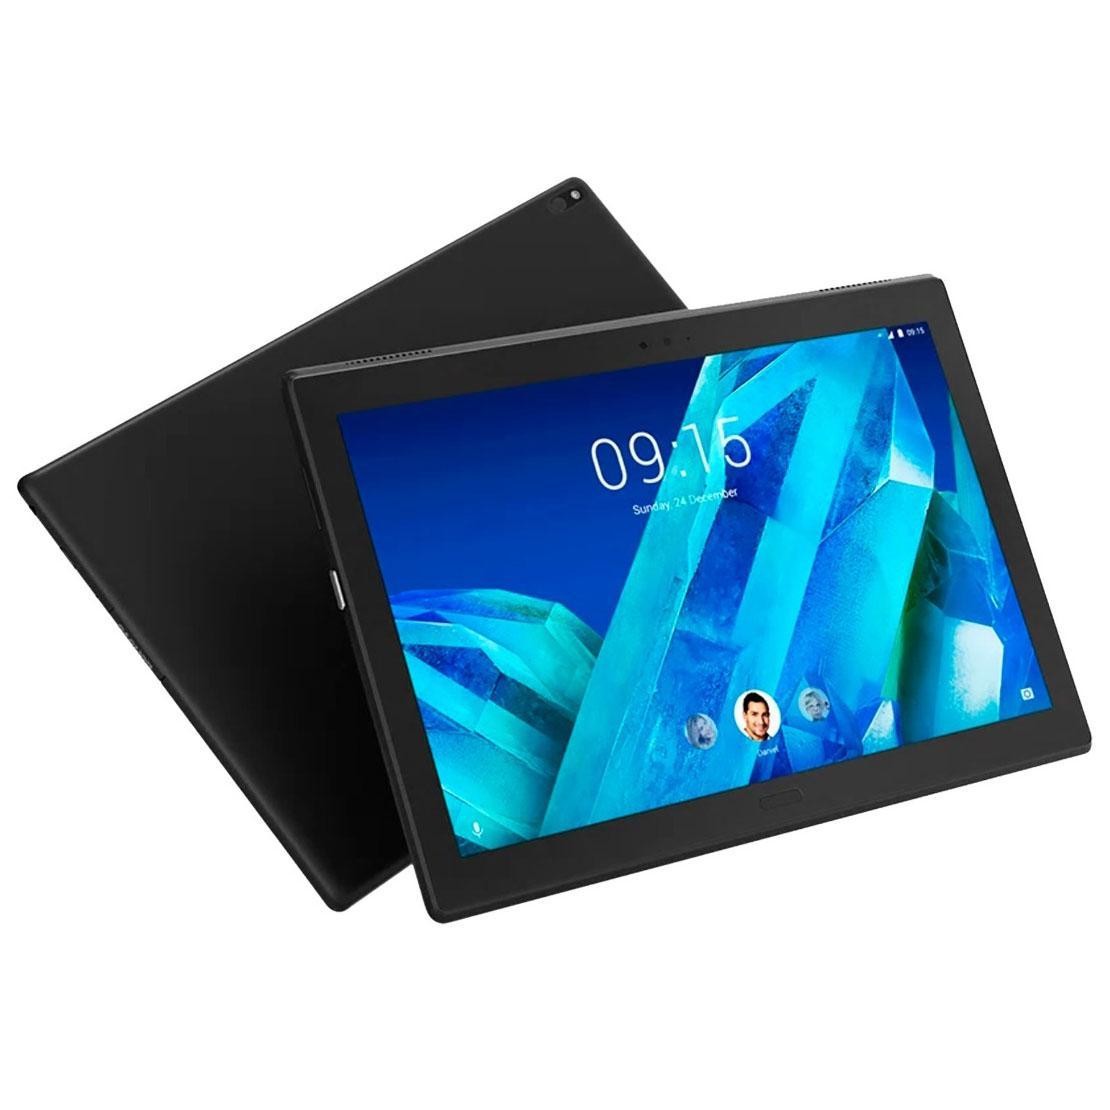 Lenovo Tab 4 10 Plus 10.1" IPS 2GB 32GB Android 7.1 Wi-Fi+4G LTE Tablet Warranty